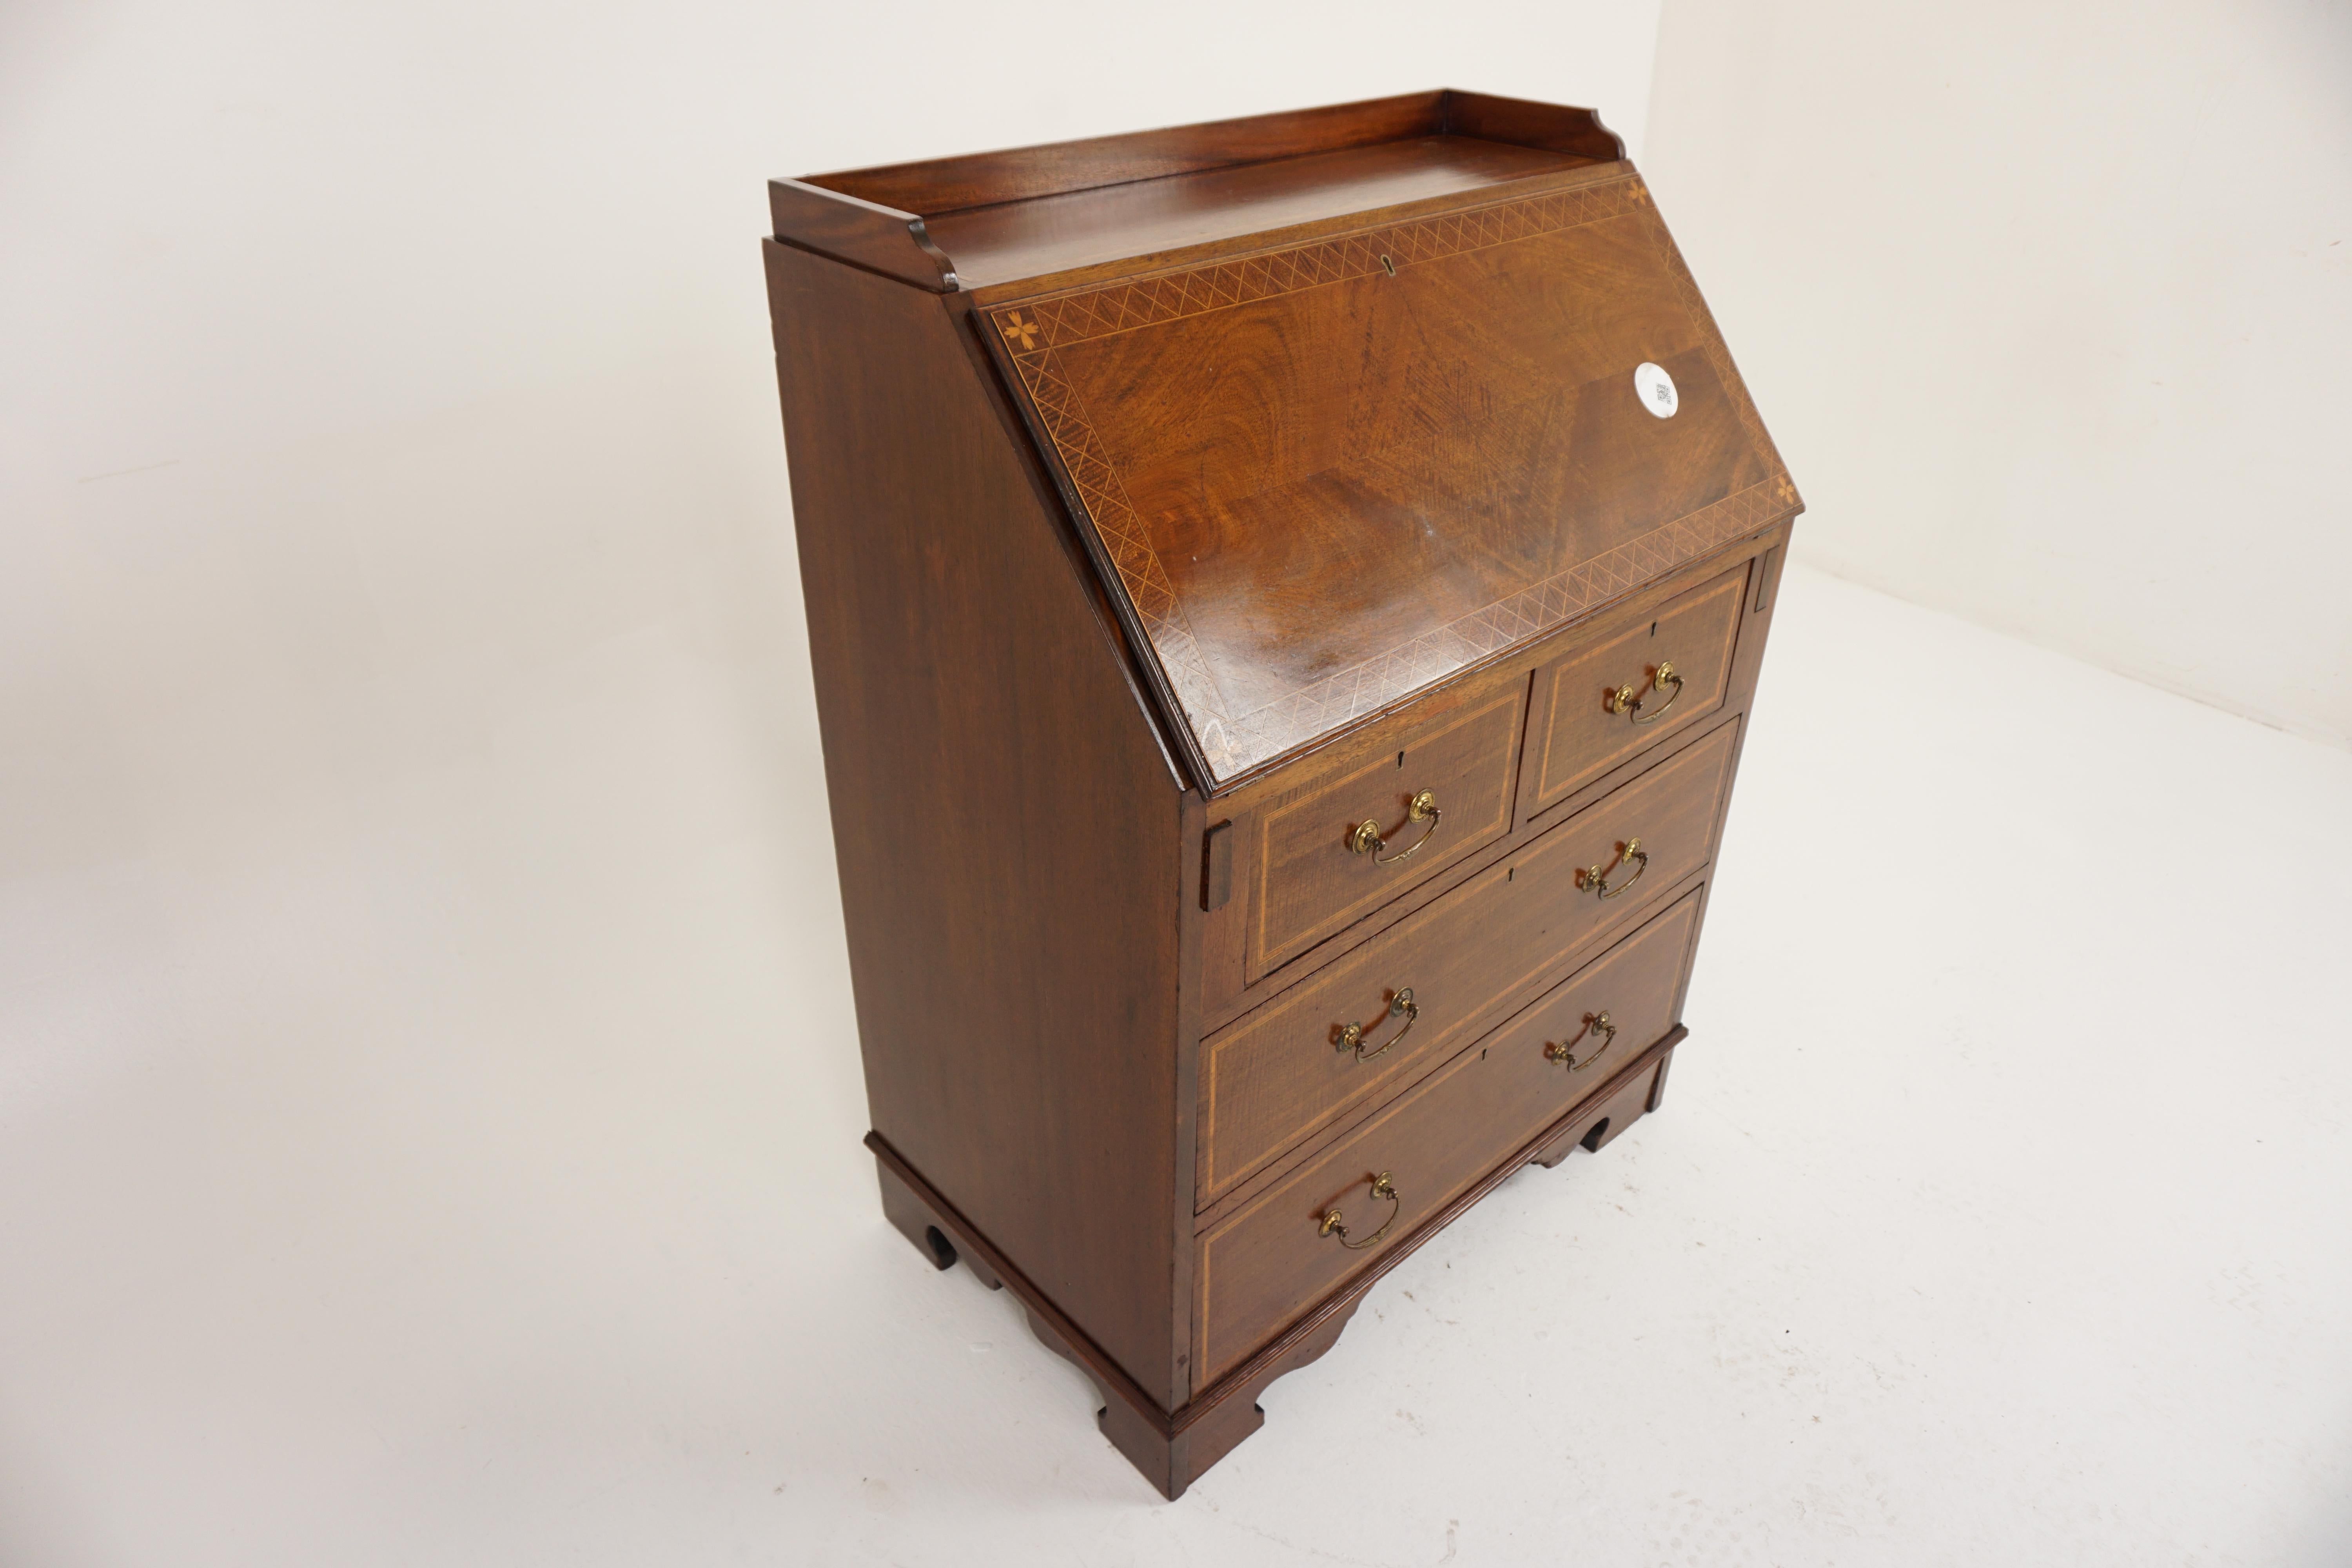 Antique Walnut Desk, Inlaid Walnut Slant Front Desk, Drop Front Bureau, Antique Furniture, Scotland 1910, H1141 

+ Scotland 1910
+ Solid Walnut
+ Original finish
+ Rectangular moulded top with raised gallery
+ The fall front top and drawer